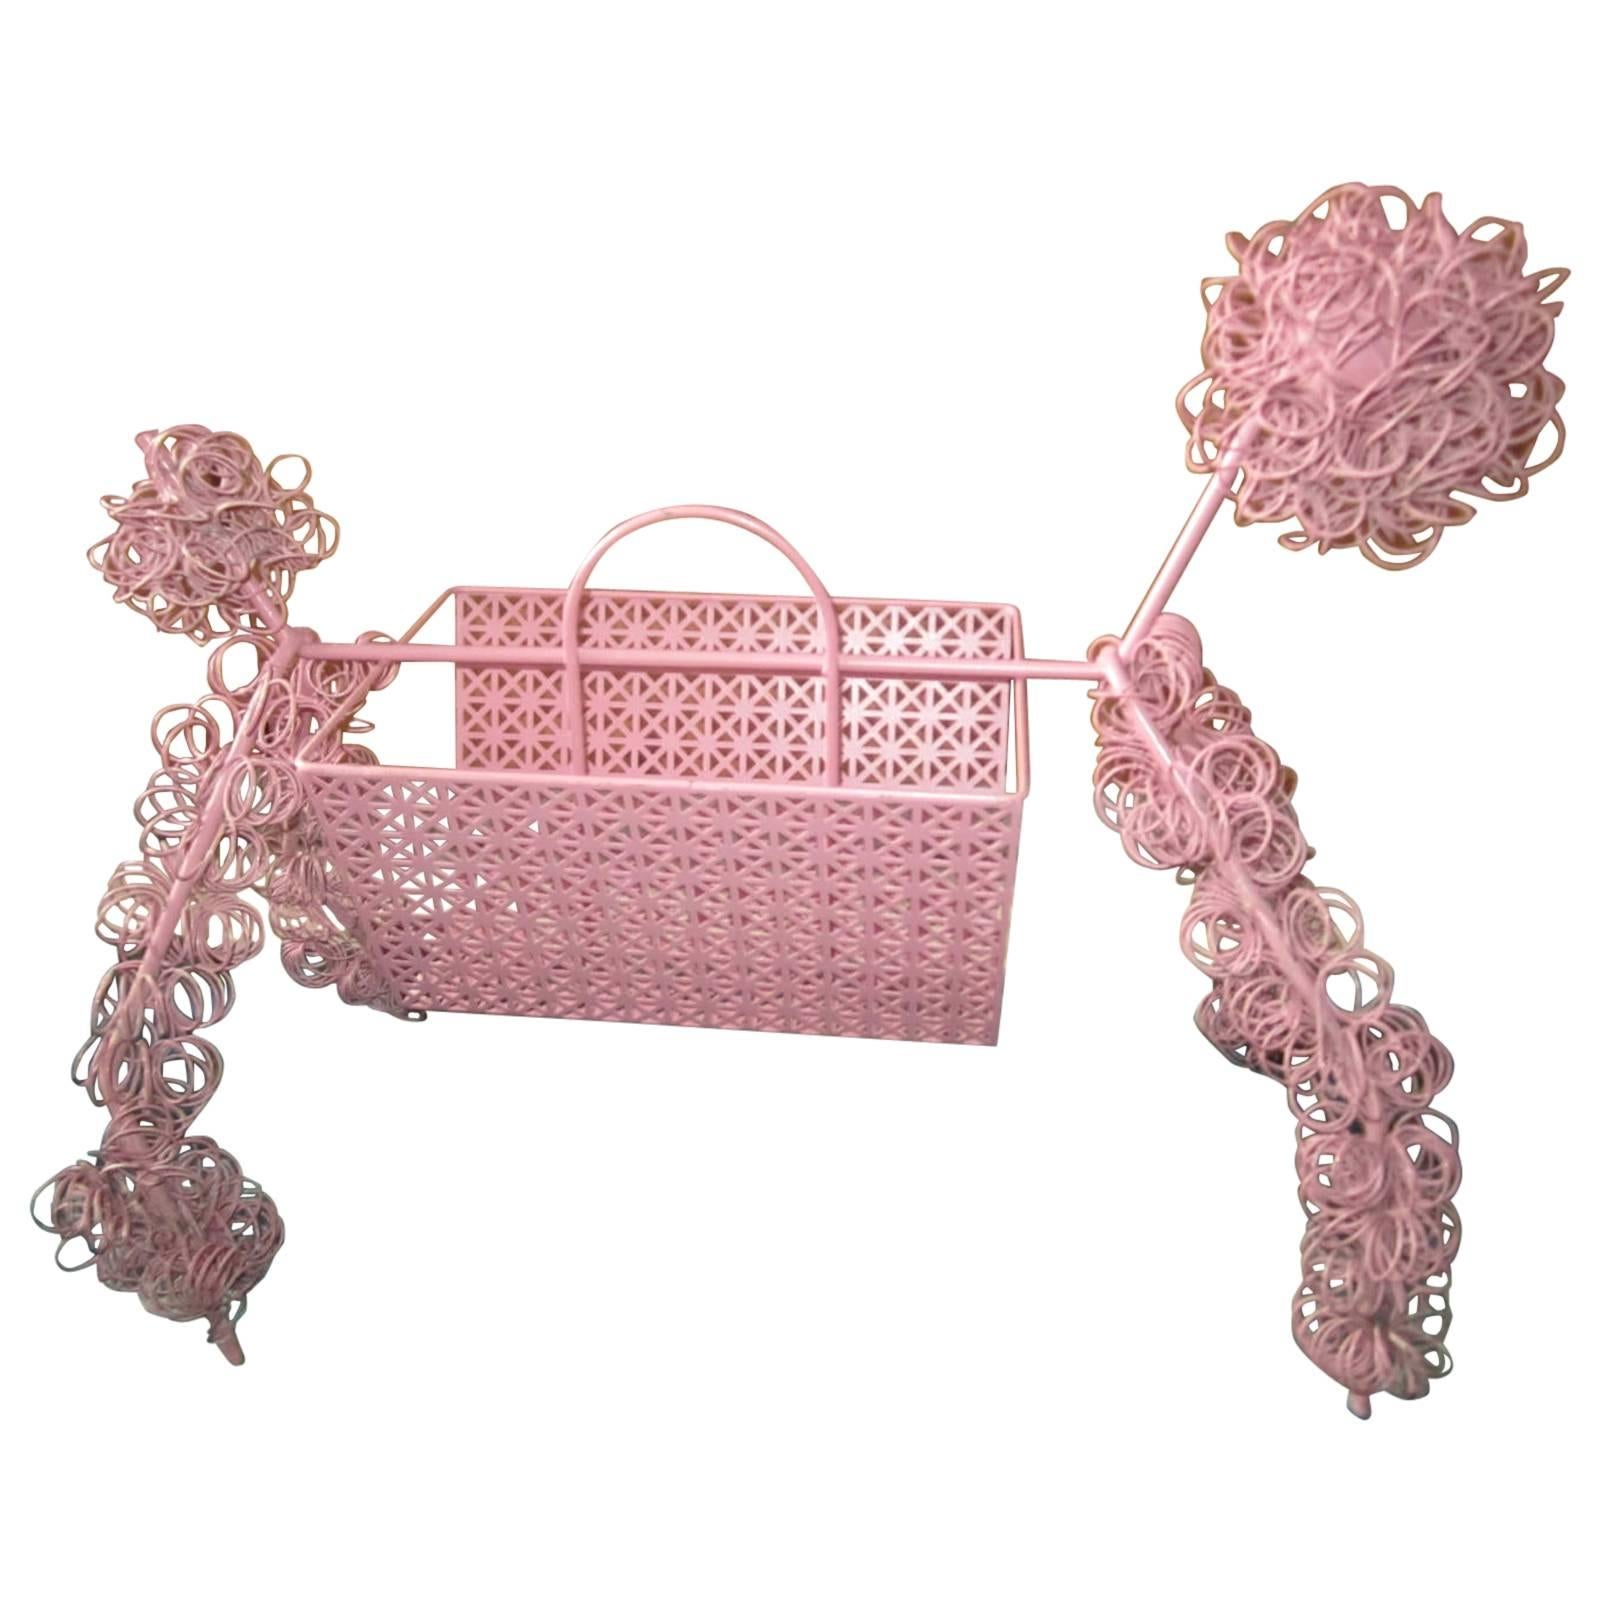 Fun Whimsical Weinberg 1950s Pink Poodle Magazine Rack For Sale